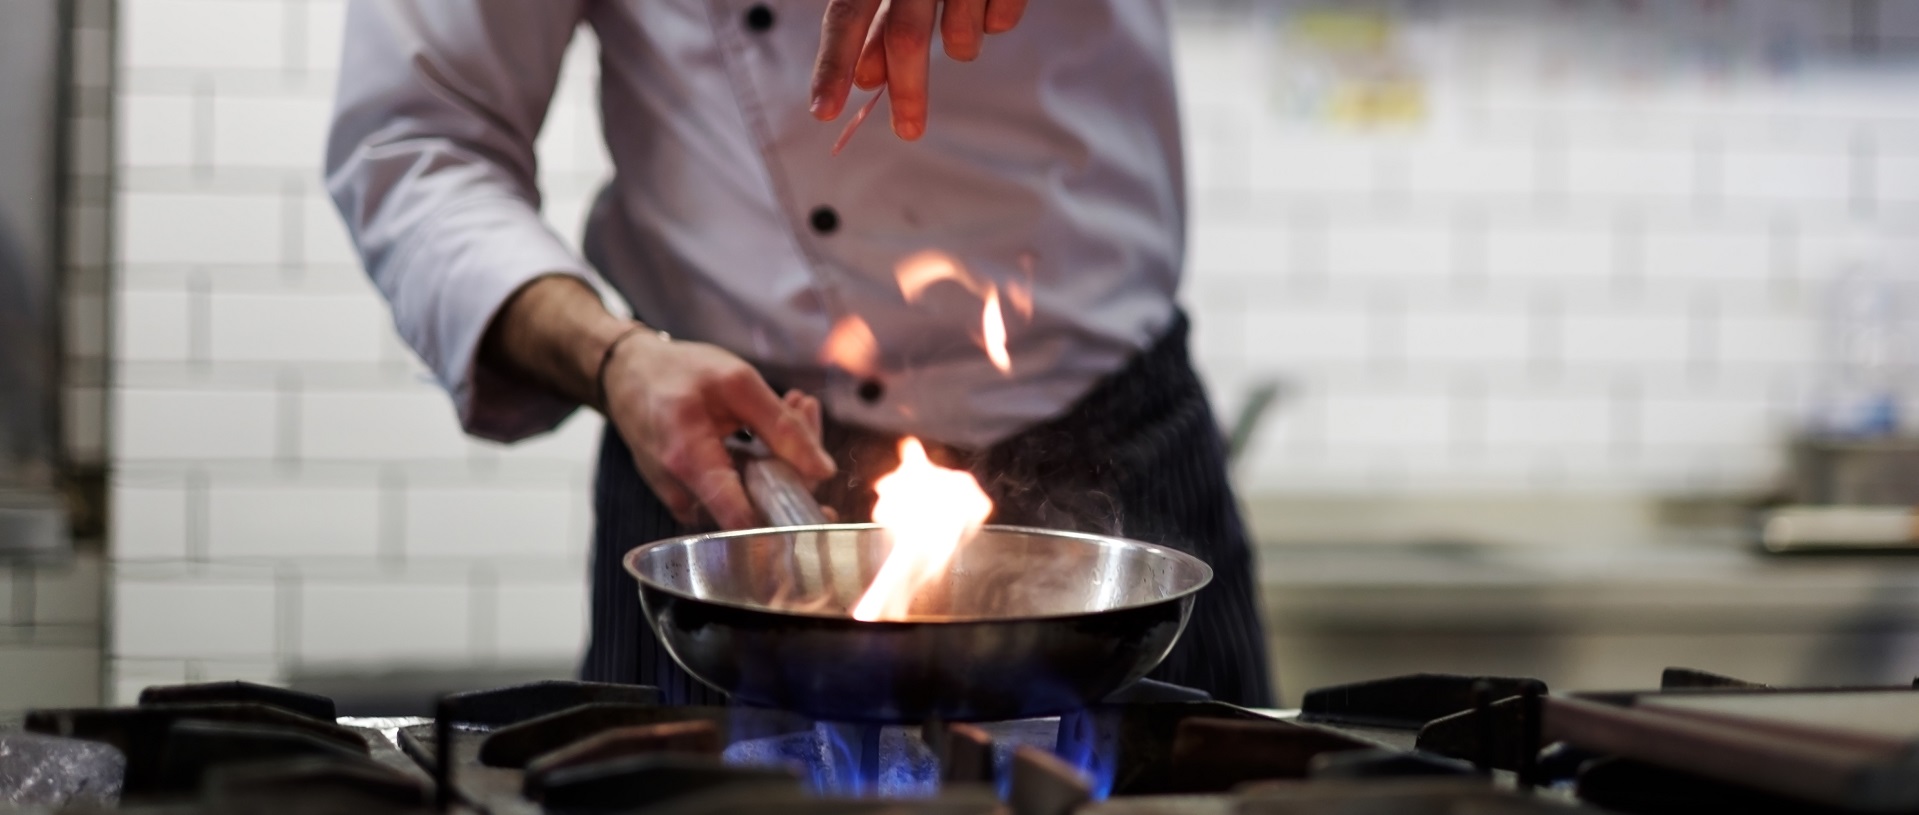 A chef cooking on gas